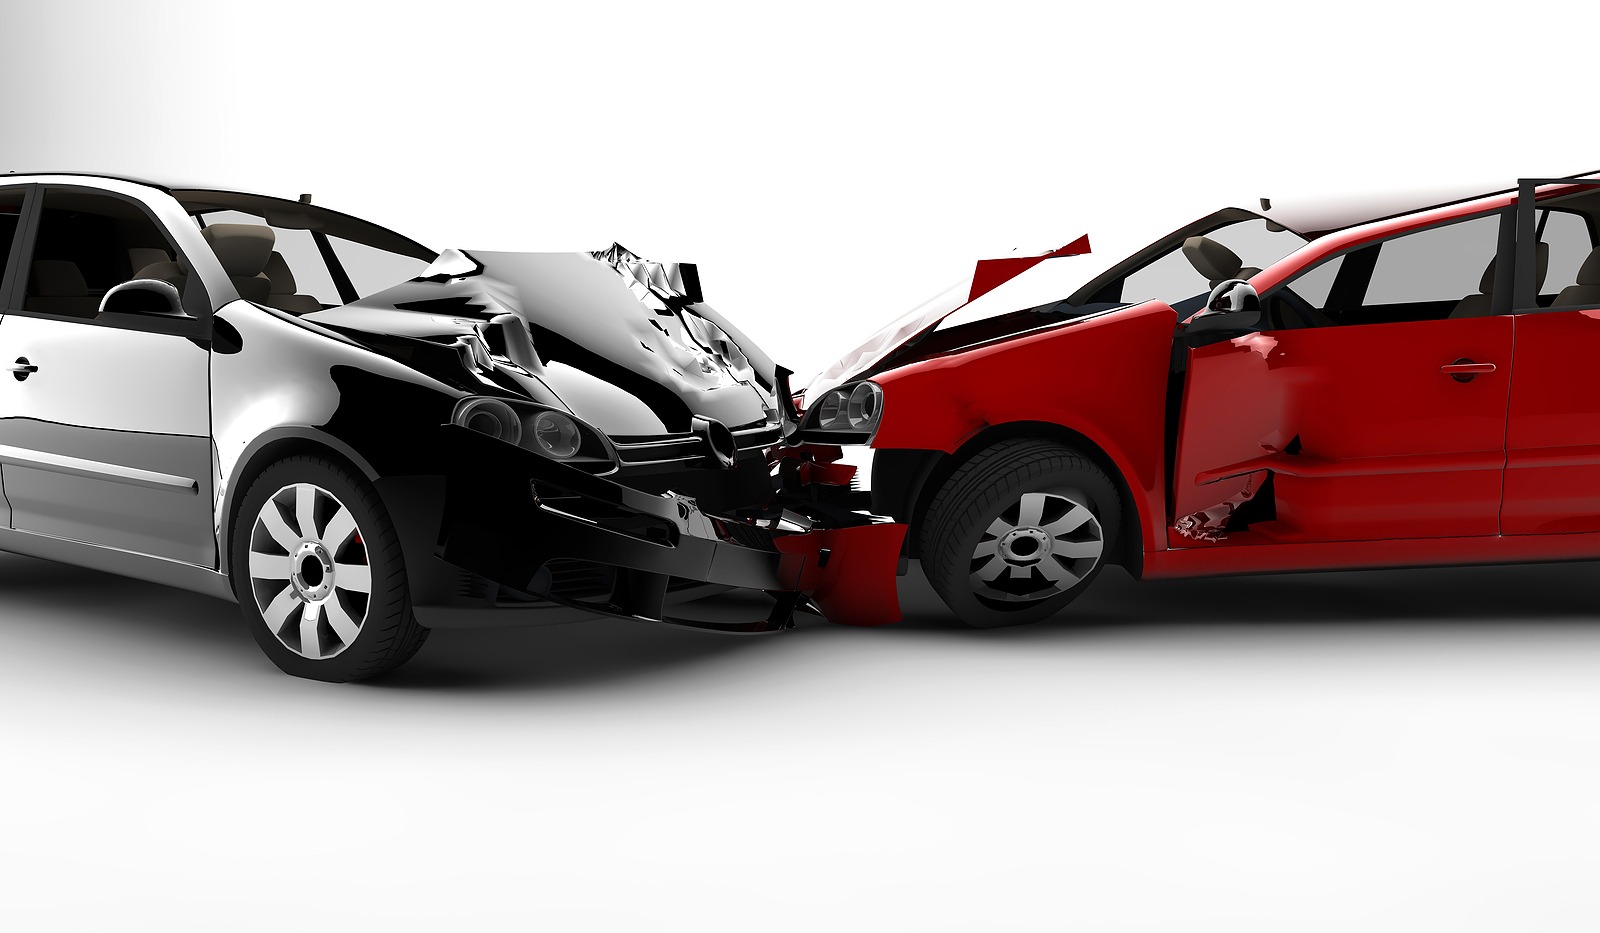 Why you should have Uninsured Motorist Insurance